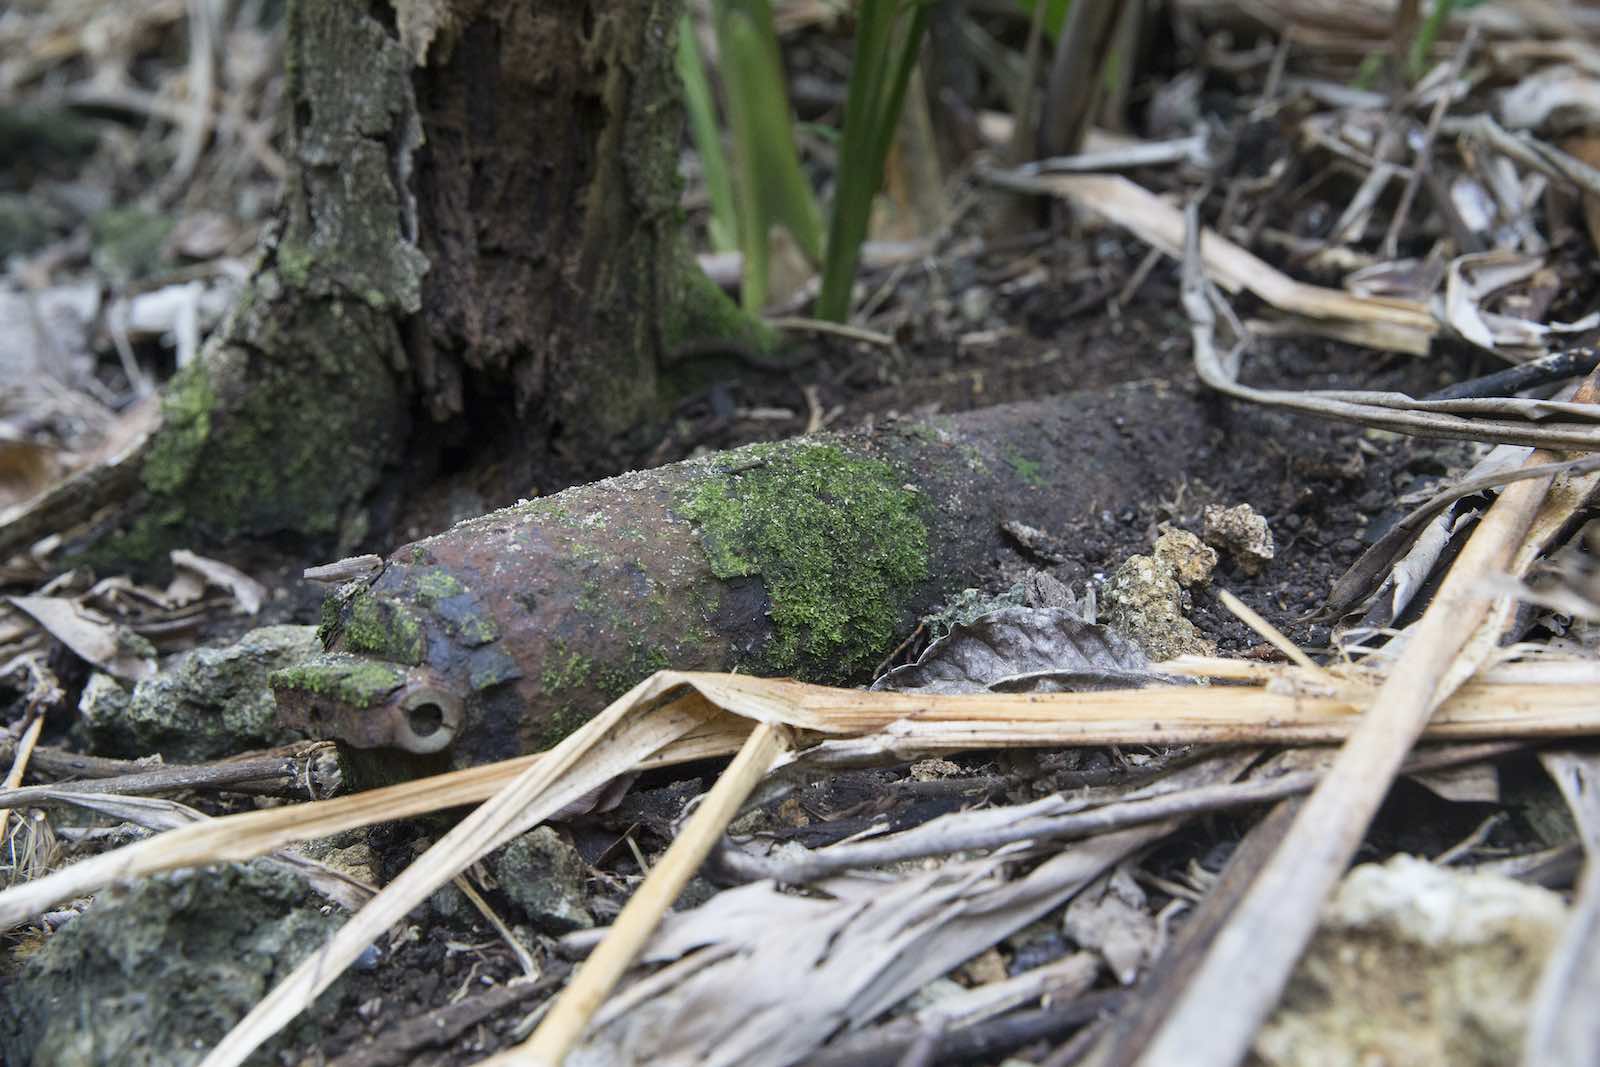 A 75mm high-explosive projectile from the Second World War found in a remote part of Solomon Islands during Operation Render Safe 2016 (Defence Department)